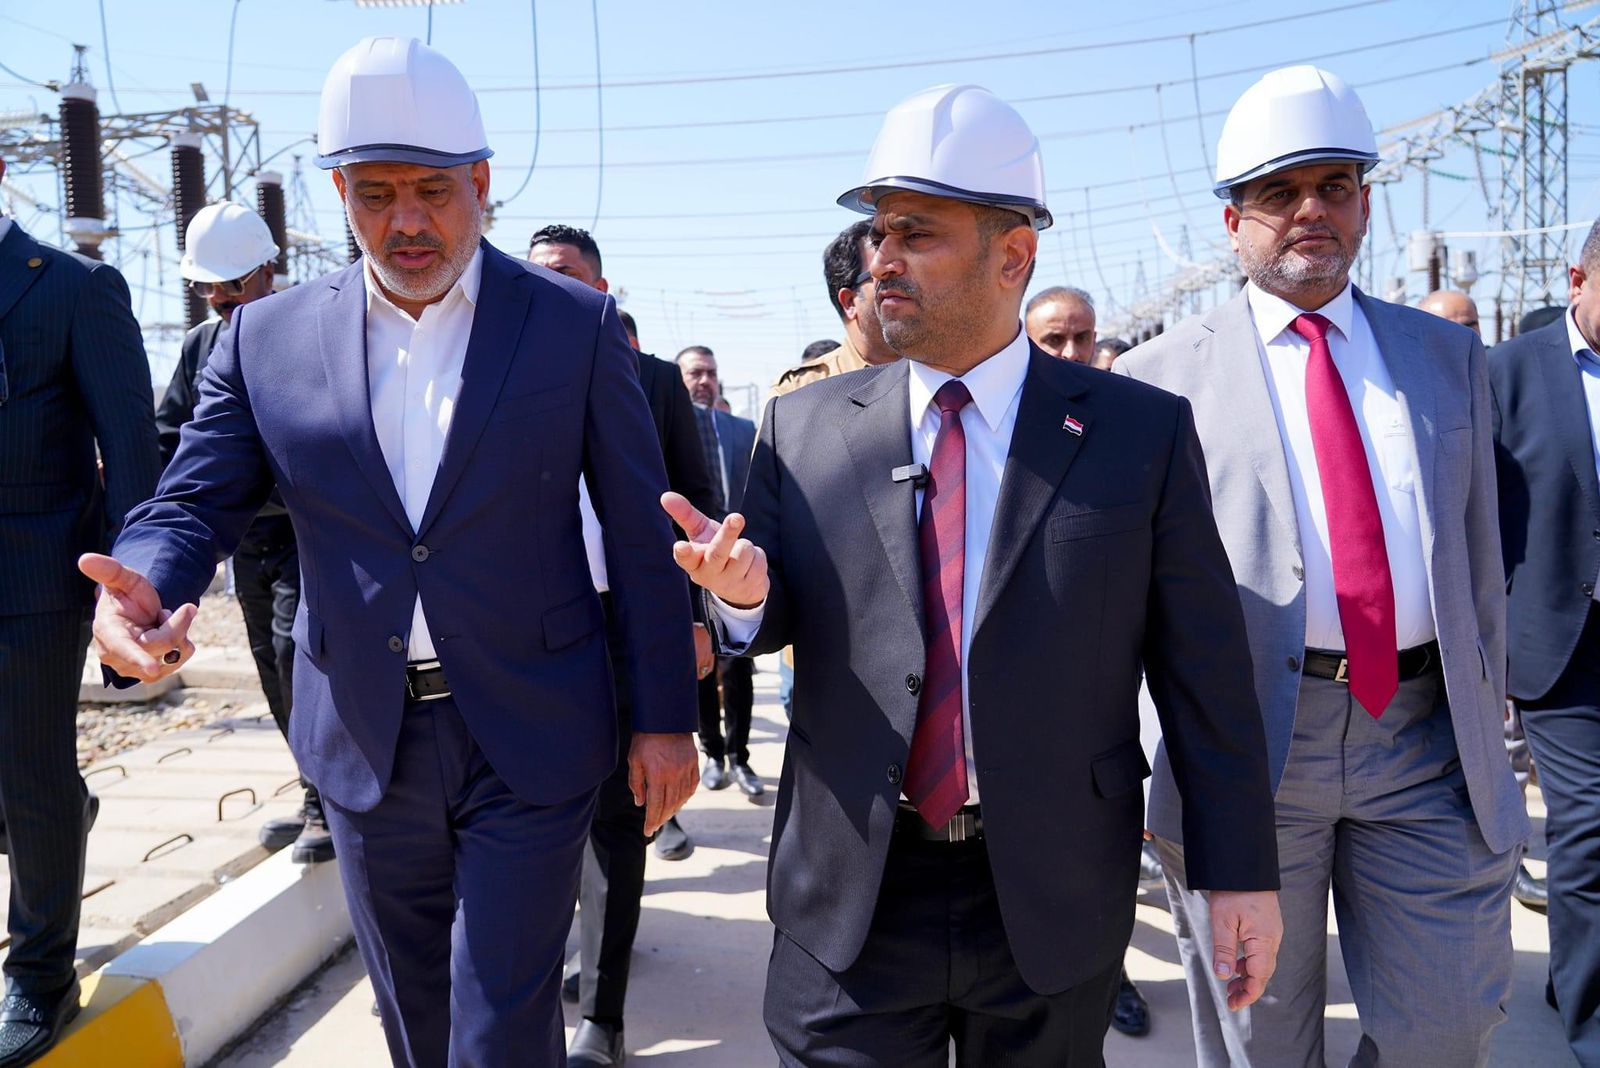 The Minister of Electricity, Ziad Ali Fadel, inaugurates 132 kV power transmission line